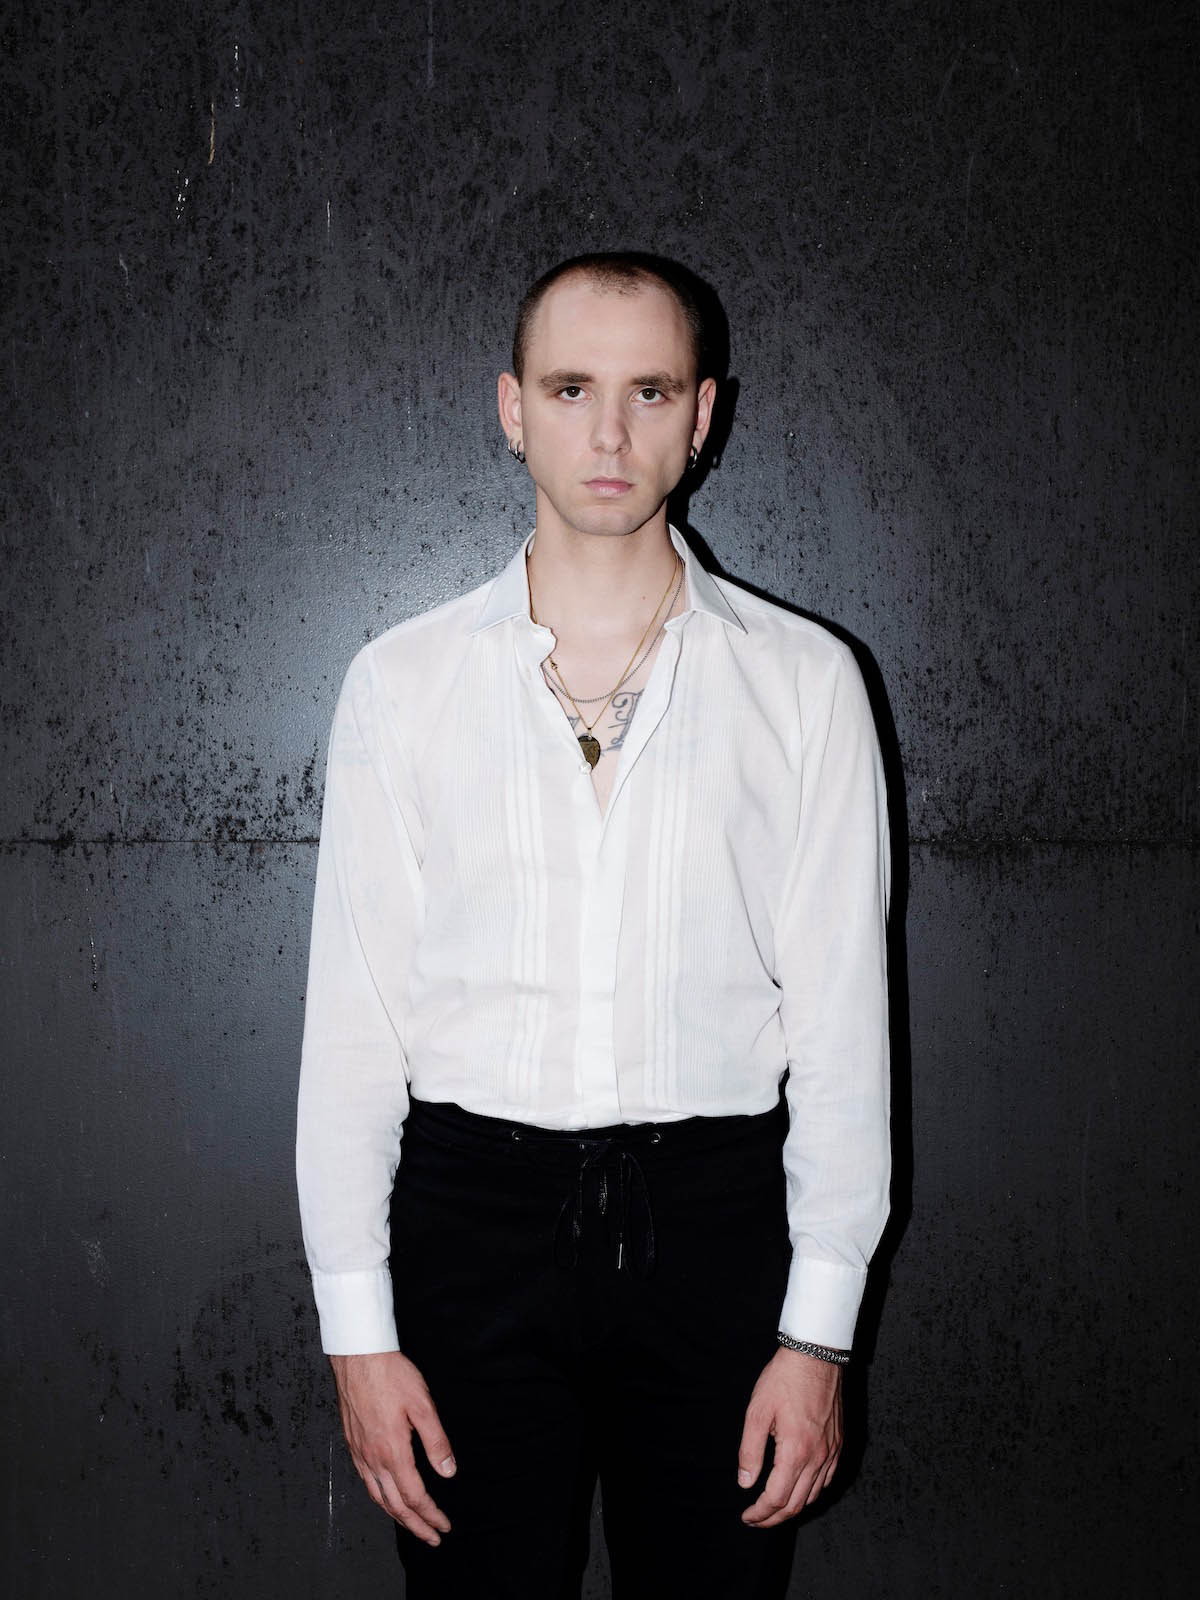 Male white person standing up visible down to the knees, looks directly into the camera, has very short hair, wears a white shirt and black trousers. The top buttons of the shirt are unbuttoned, so you can see a necklace and tattoos. He is wearing earrings in both ears.